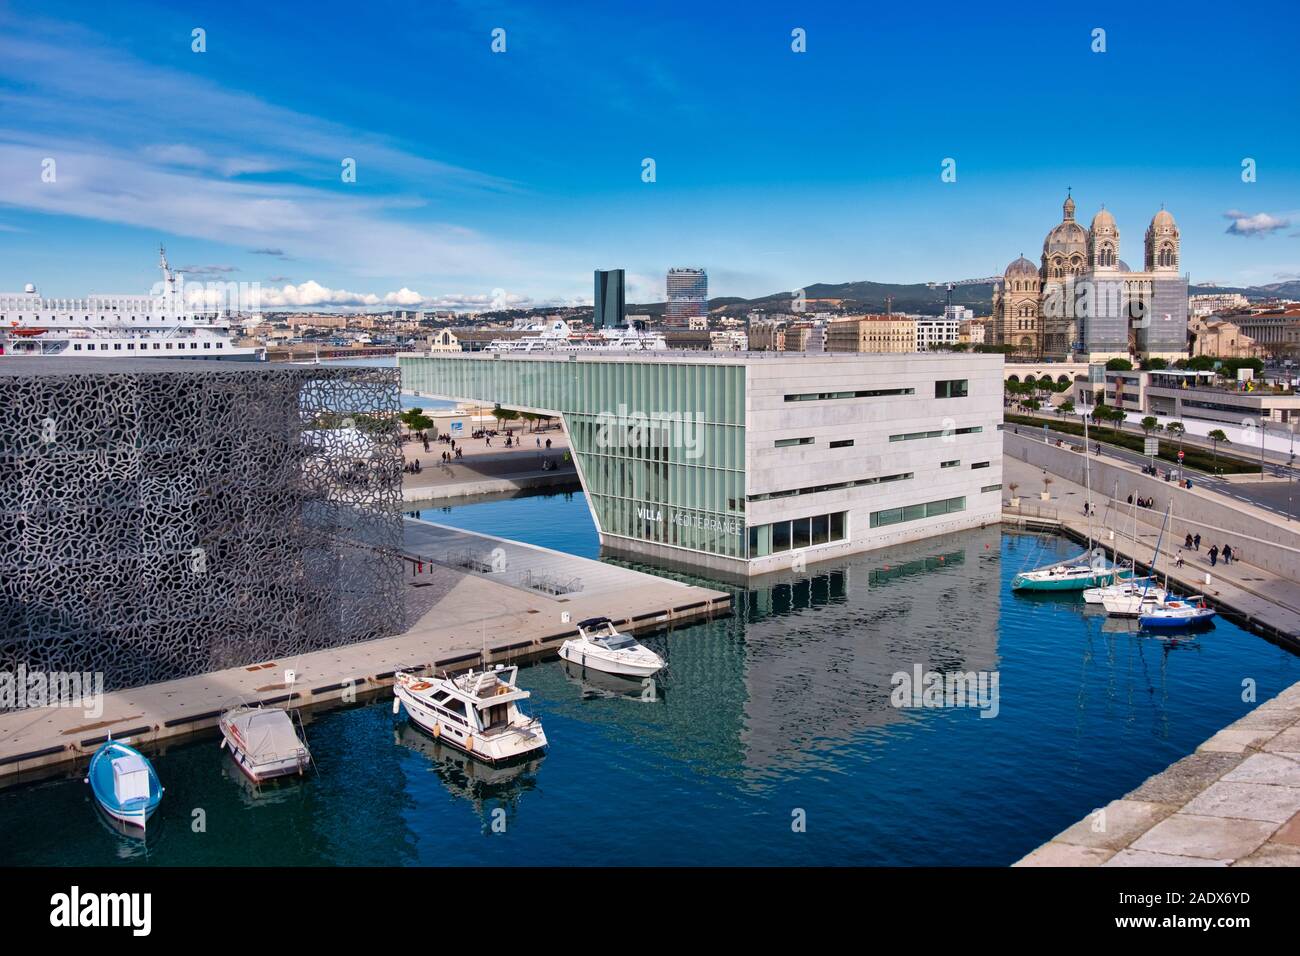 Aerial view of the MUCEM museum, Villa Méditerranée cultural centre and the Cathedral of Saint Mary Major in Marseille, France, Europe Stock Photo